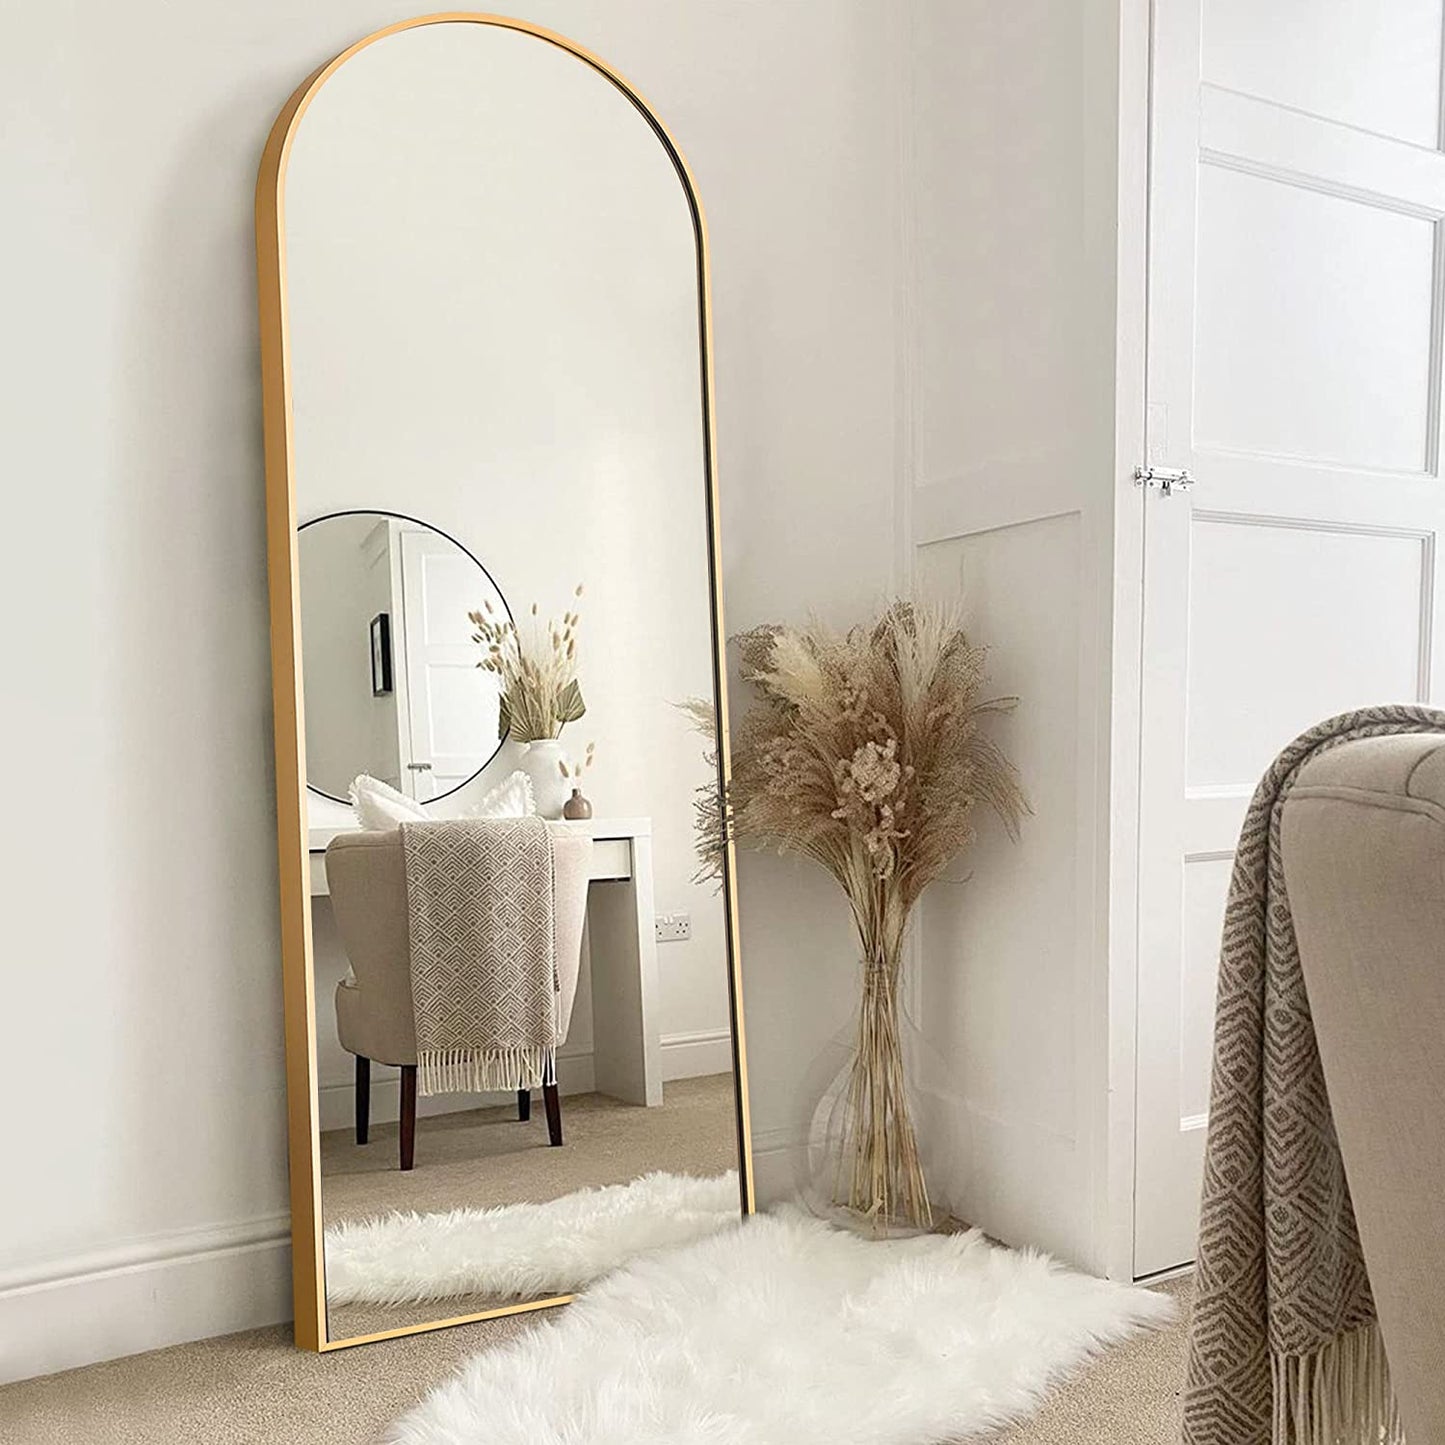 Arched Full Length Mirror Standing Hanging or Leaning against Wall, Oversized Large Bedroom Mirror Floor Mirror Dressing Mirror, Aluminum Alloy Thin Frame, Gold, 65"X22"